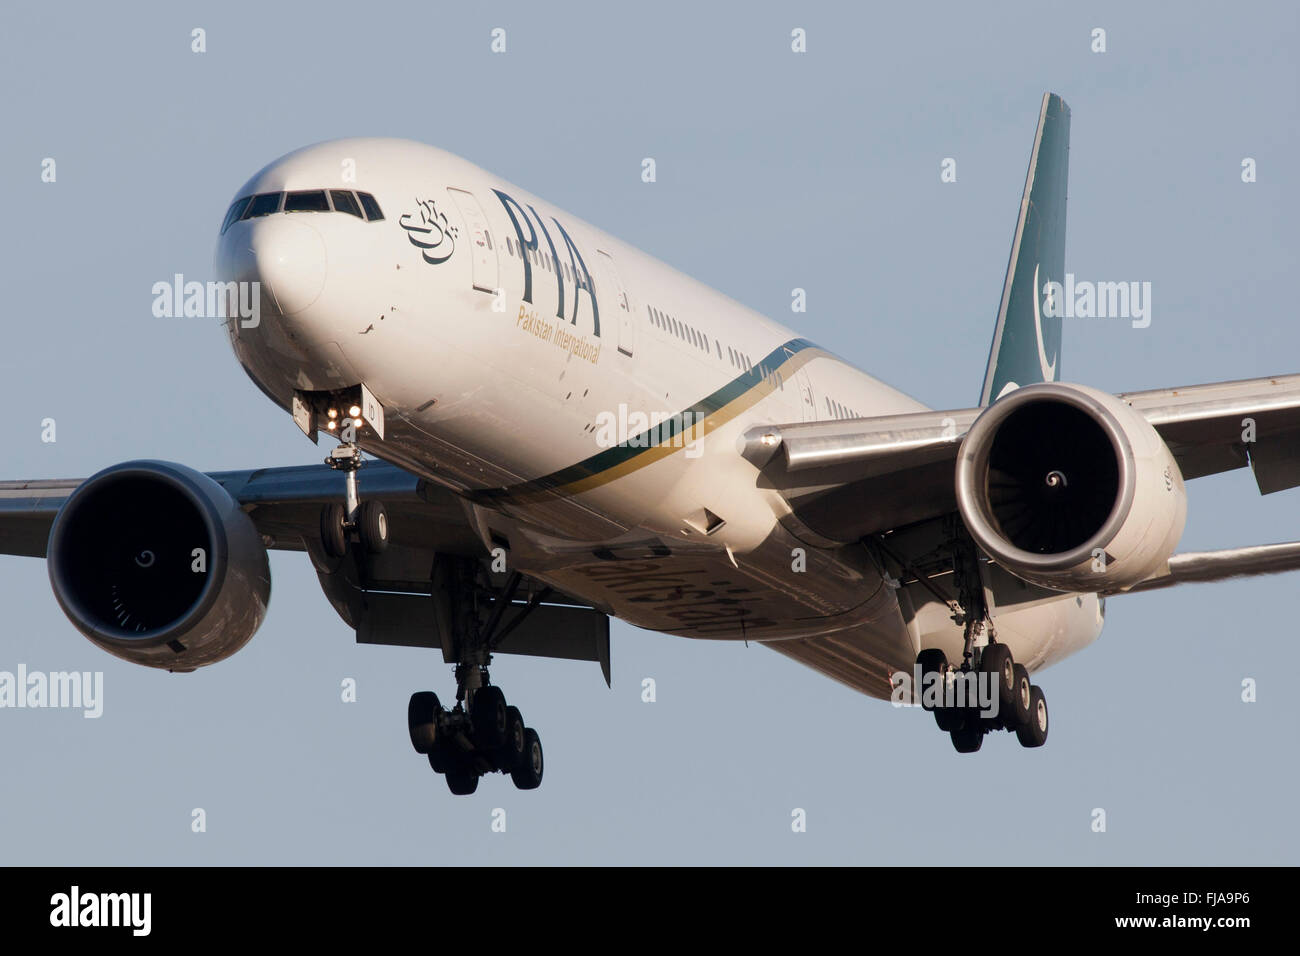 PIA Pakistan International Airlines Boeing 777 Banque D'Images